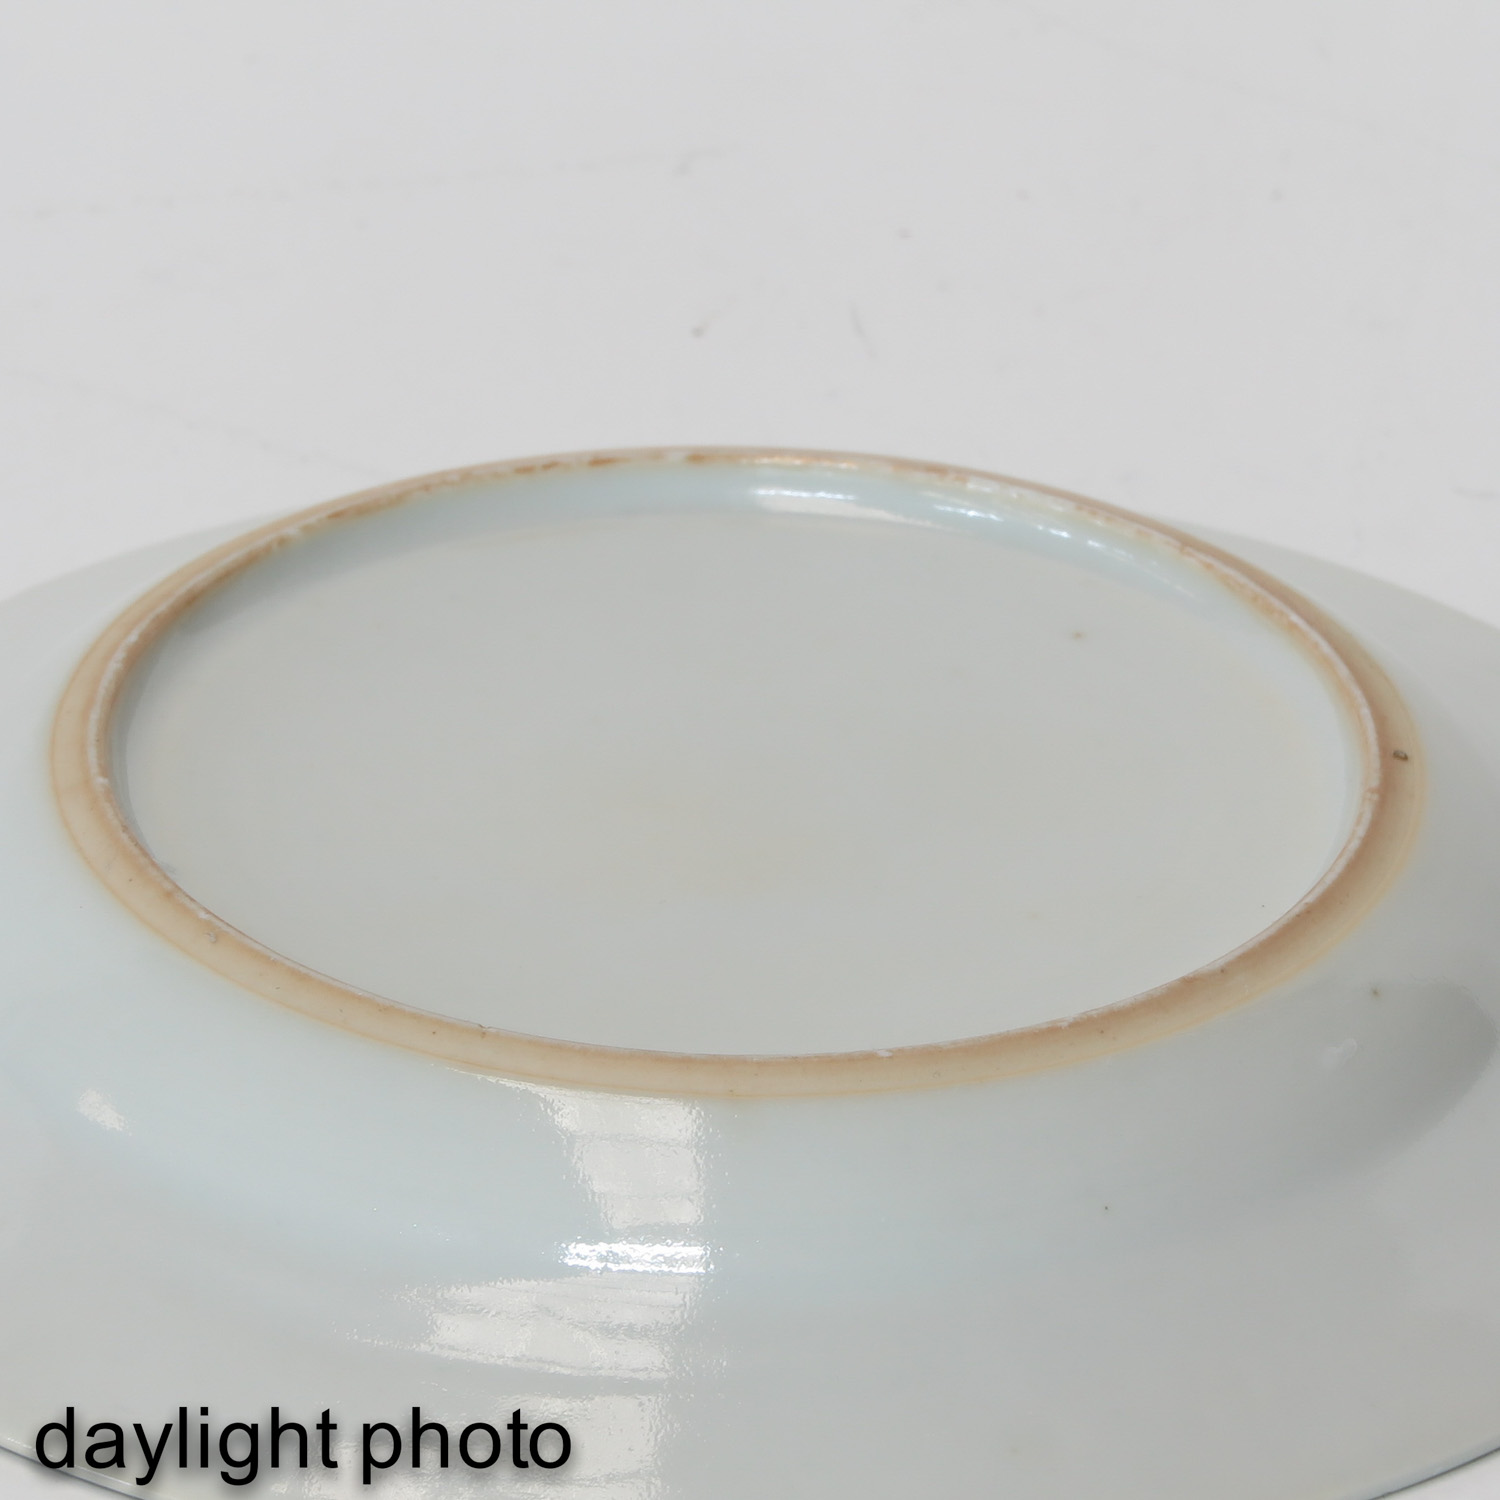 A Series of 5 Blue and White Plates - Image 8 of 9